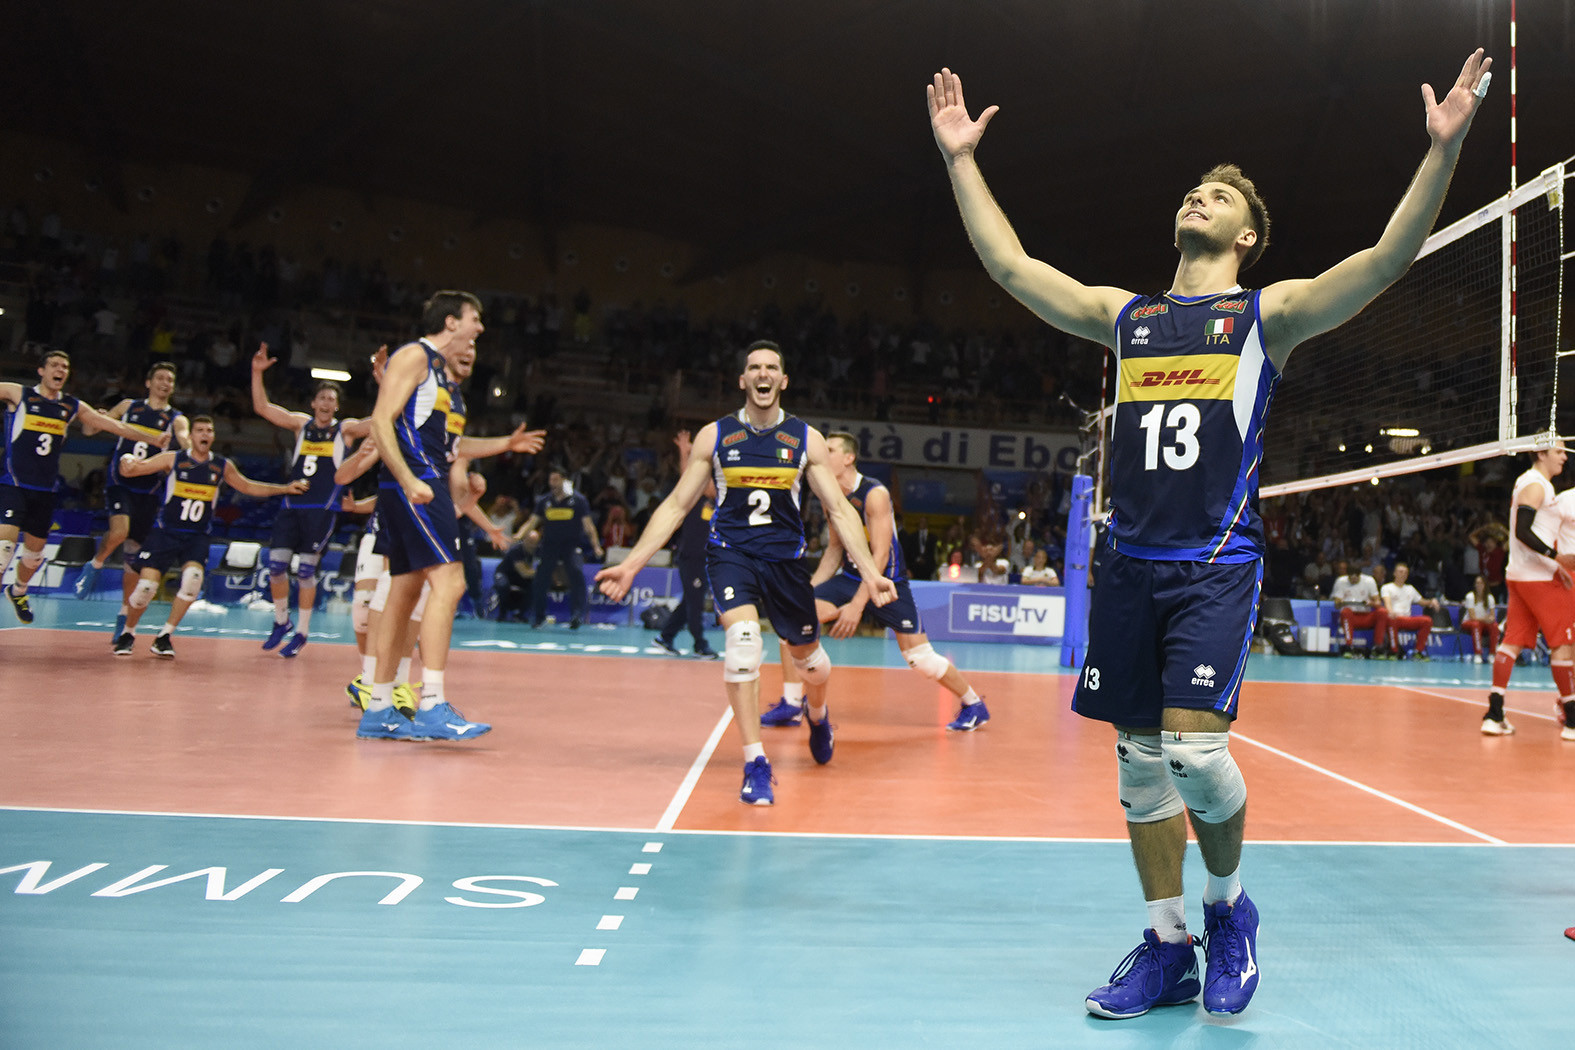 Italy thrilled the fans at the PalaSele in Eboli as they won the men's volleyball final ©Naples 2019